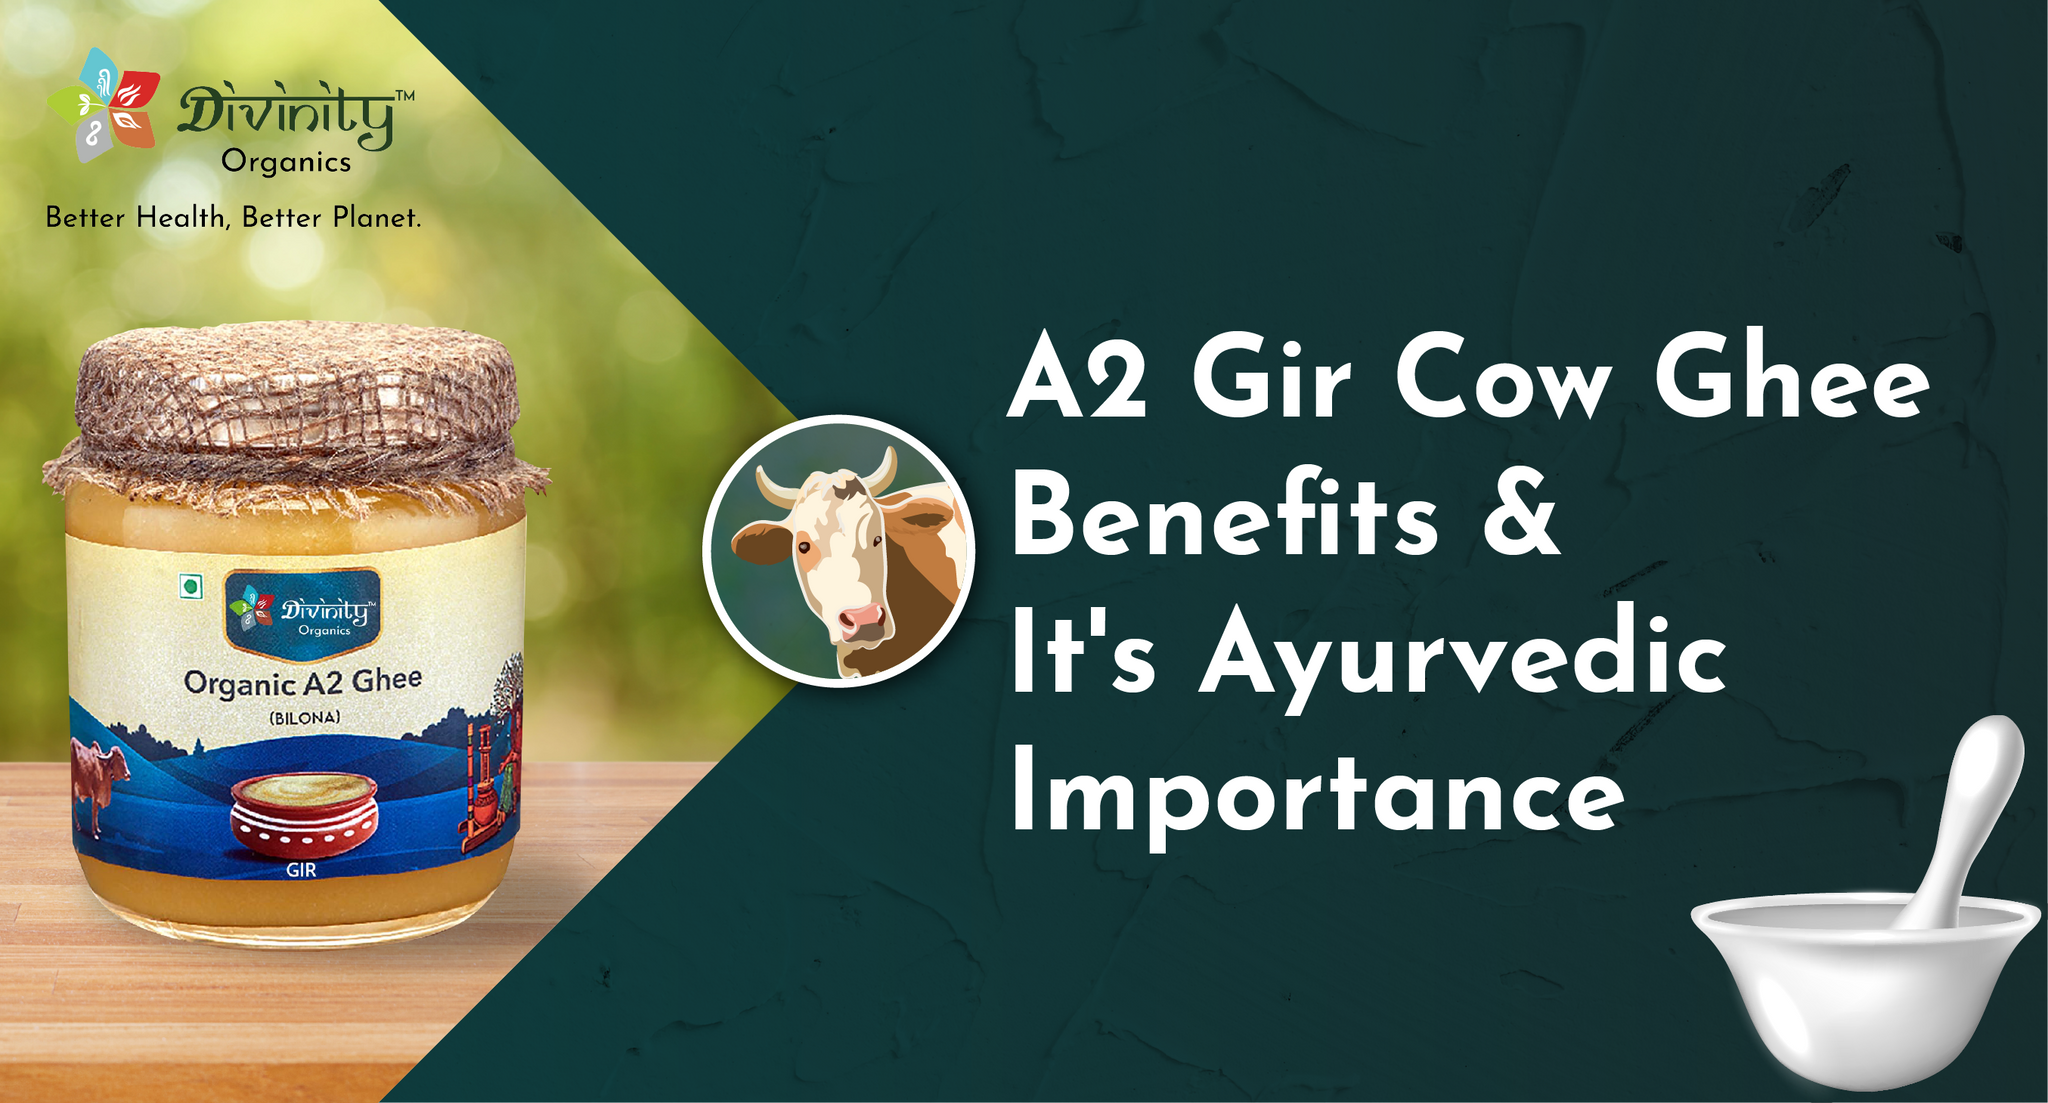 A2 Gir Cow Ghee Benefits and Its Ayurvedic Importance